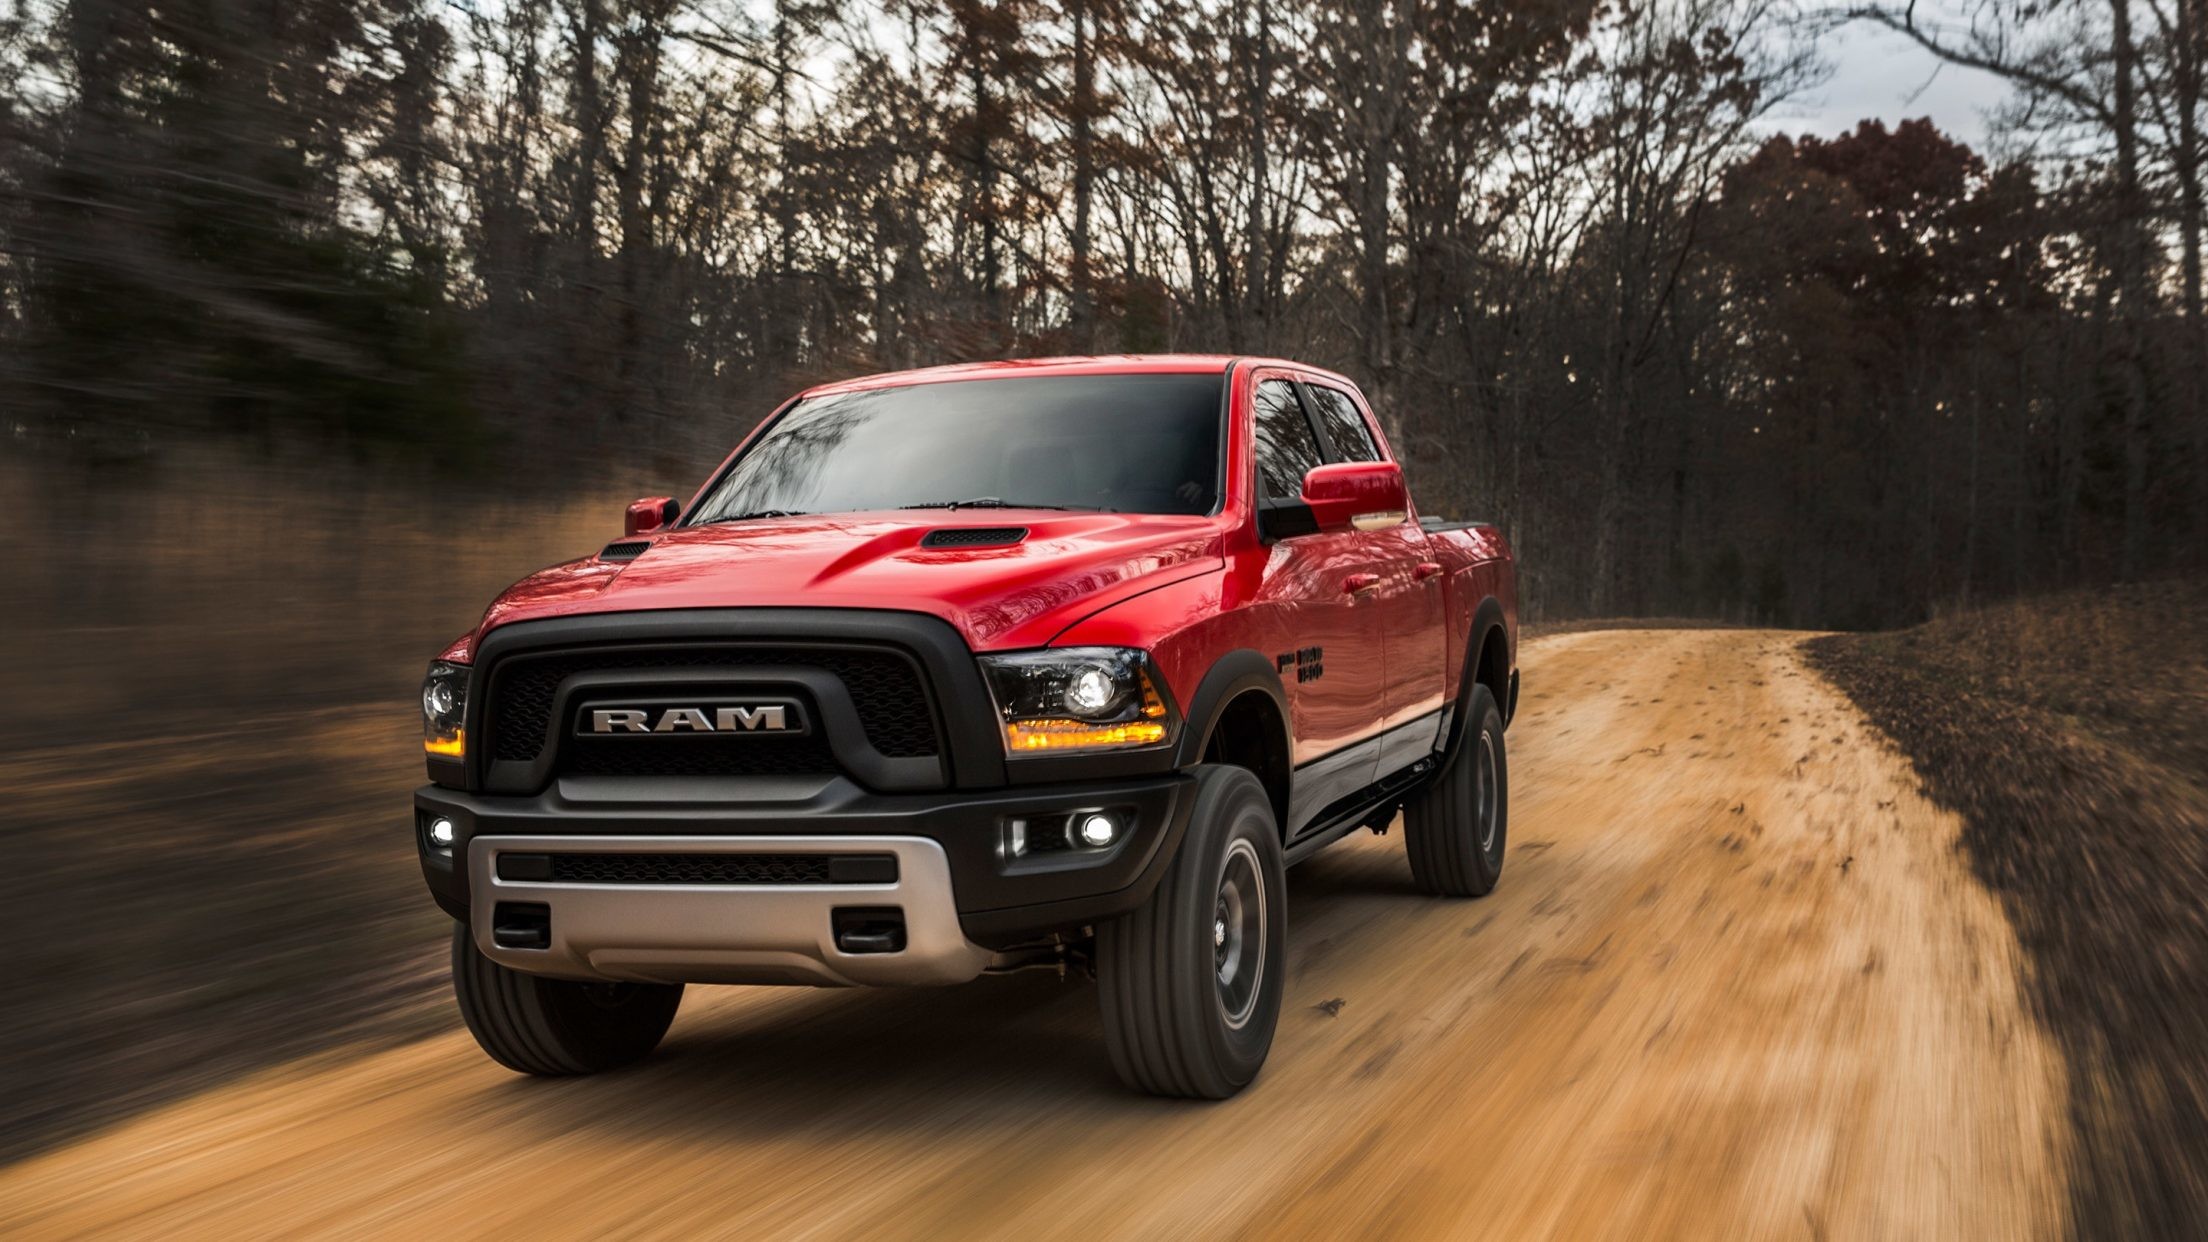 Tablet Android/ipad - Dodge Equivalent To Ford Raptor - HD Wallpaper 